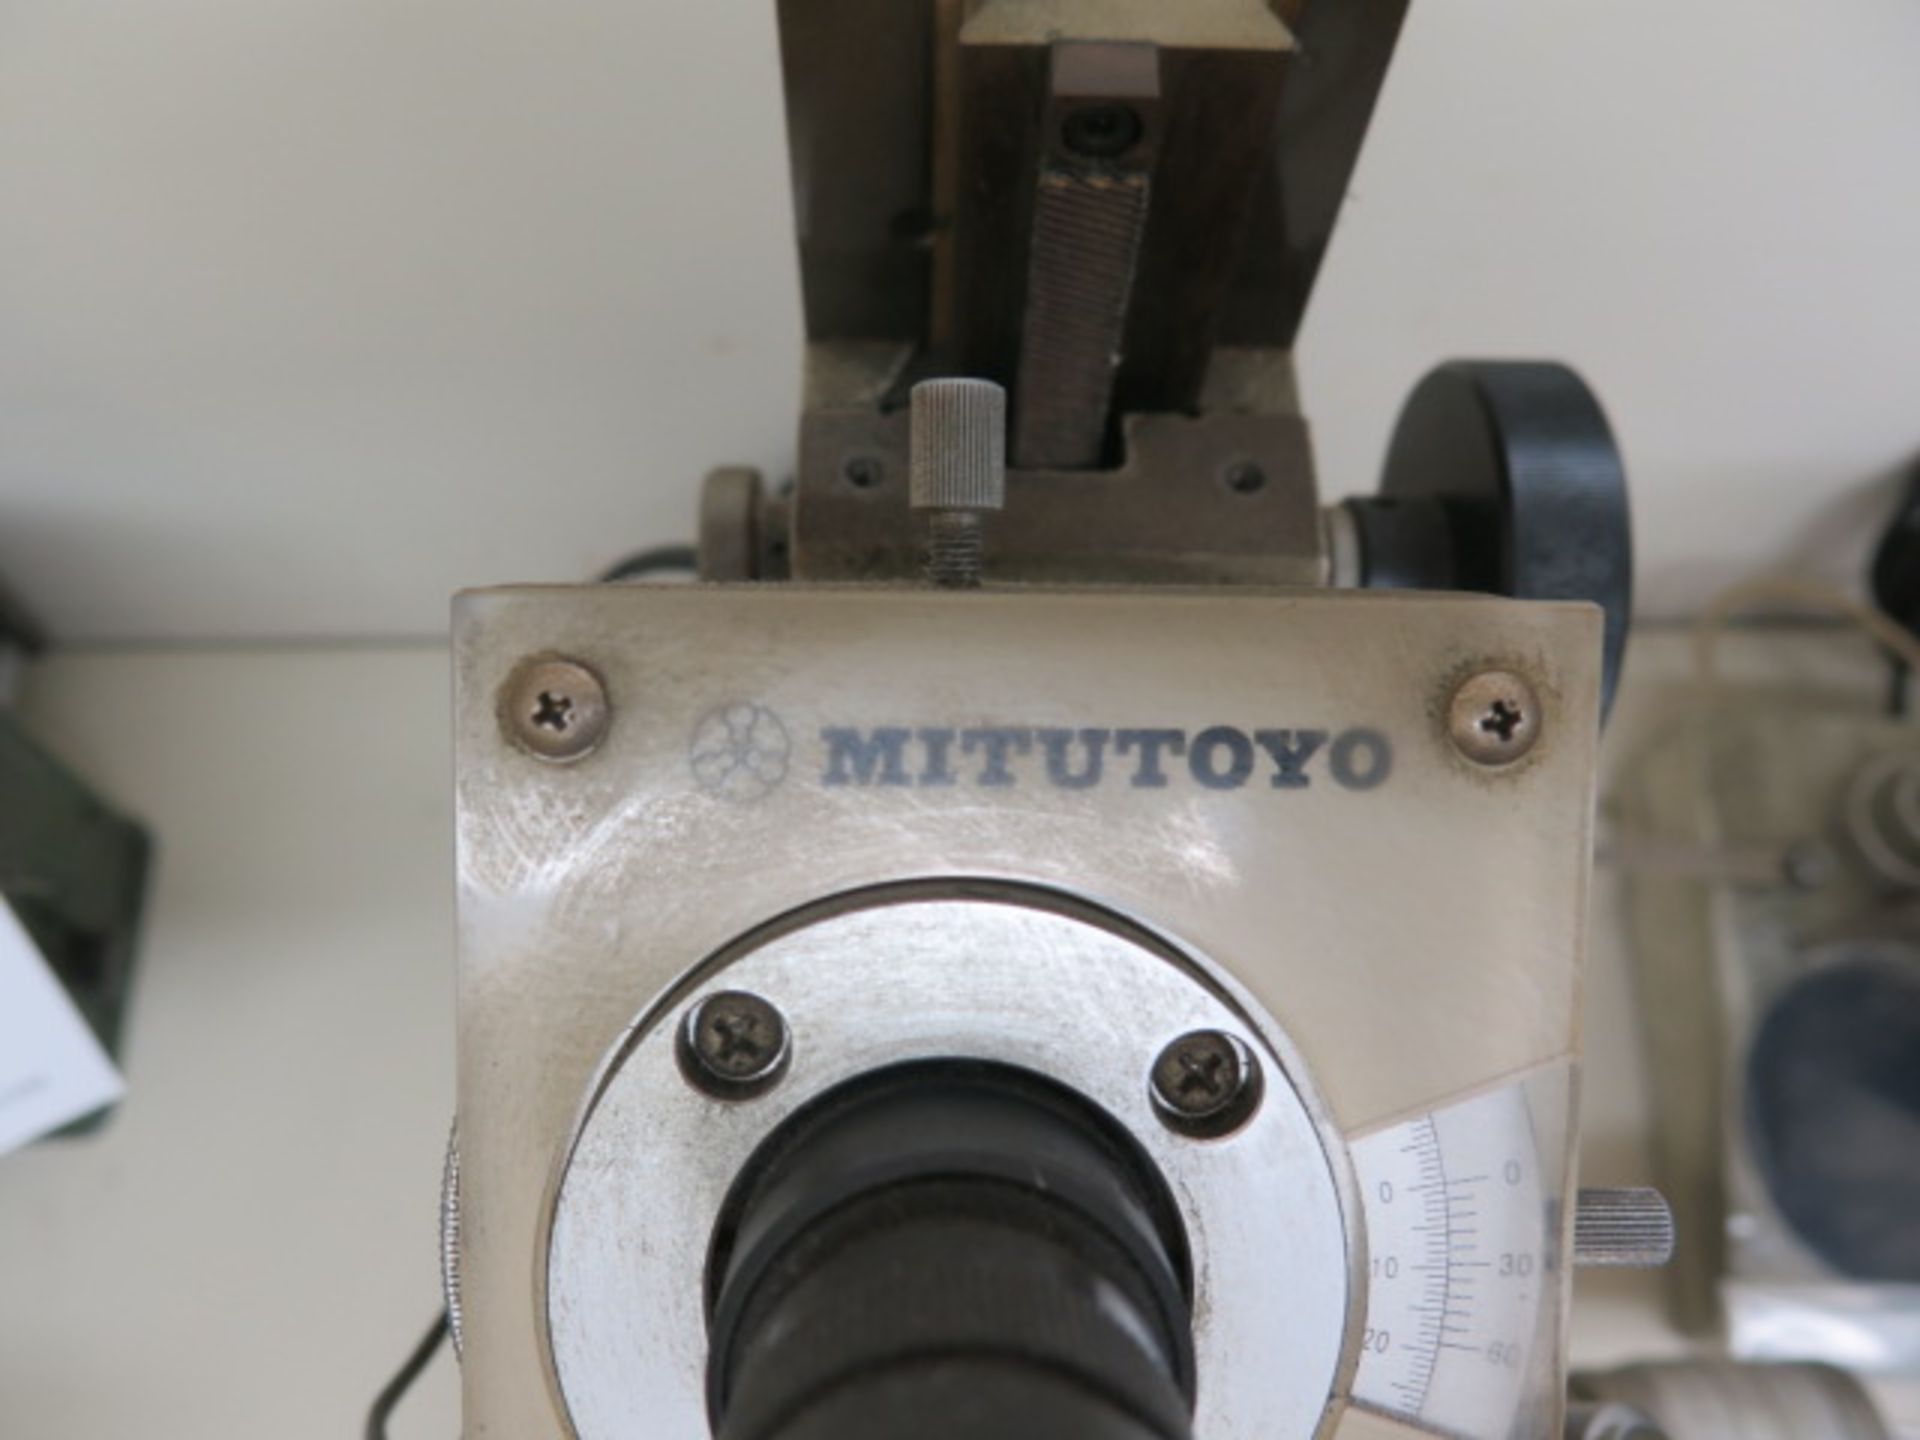 Mitutoyo Tool Makers Microscope w/ Light Source (SOLD AS-IS - NO WARRANTY) - Image 9 of 9